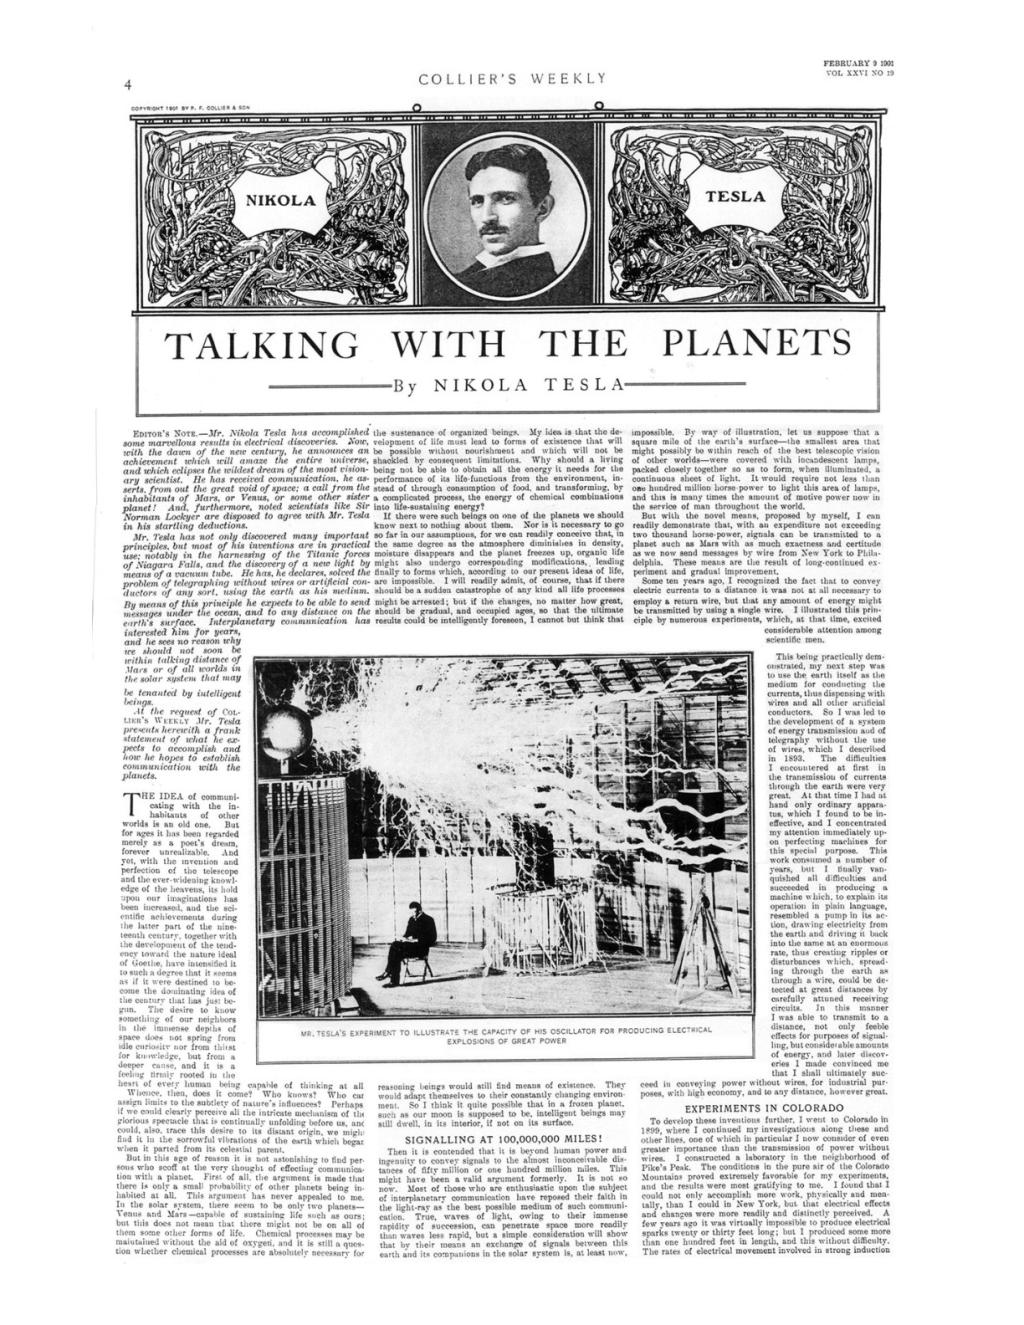 Preview of Talking with the Planets article